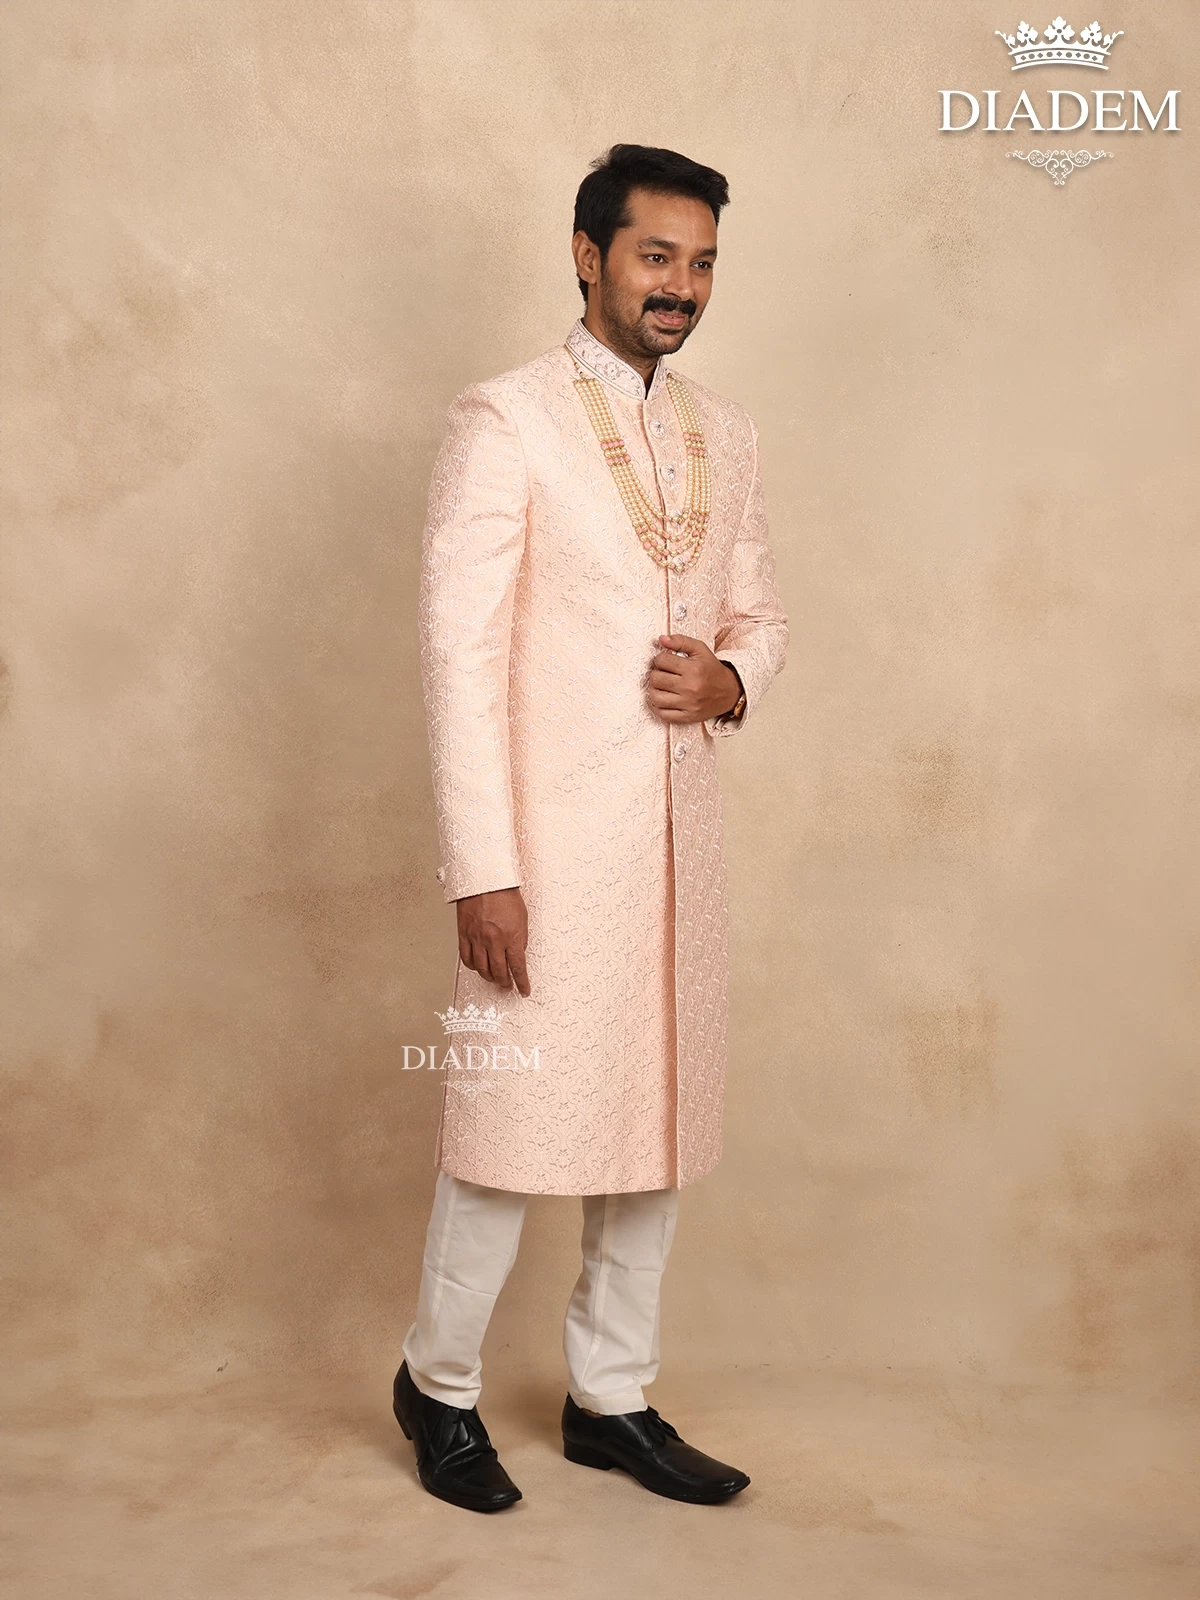 Light Peach Raw Silk Sherwani Suit Adorned With Floral Threadwork Embroidery, Paired With Bead Mala